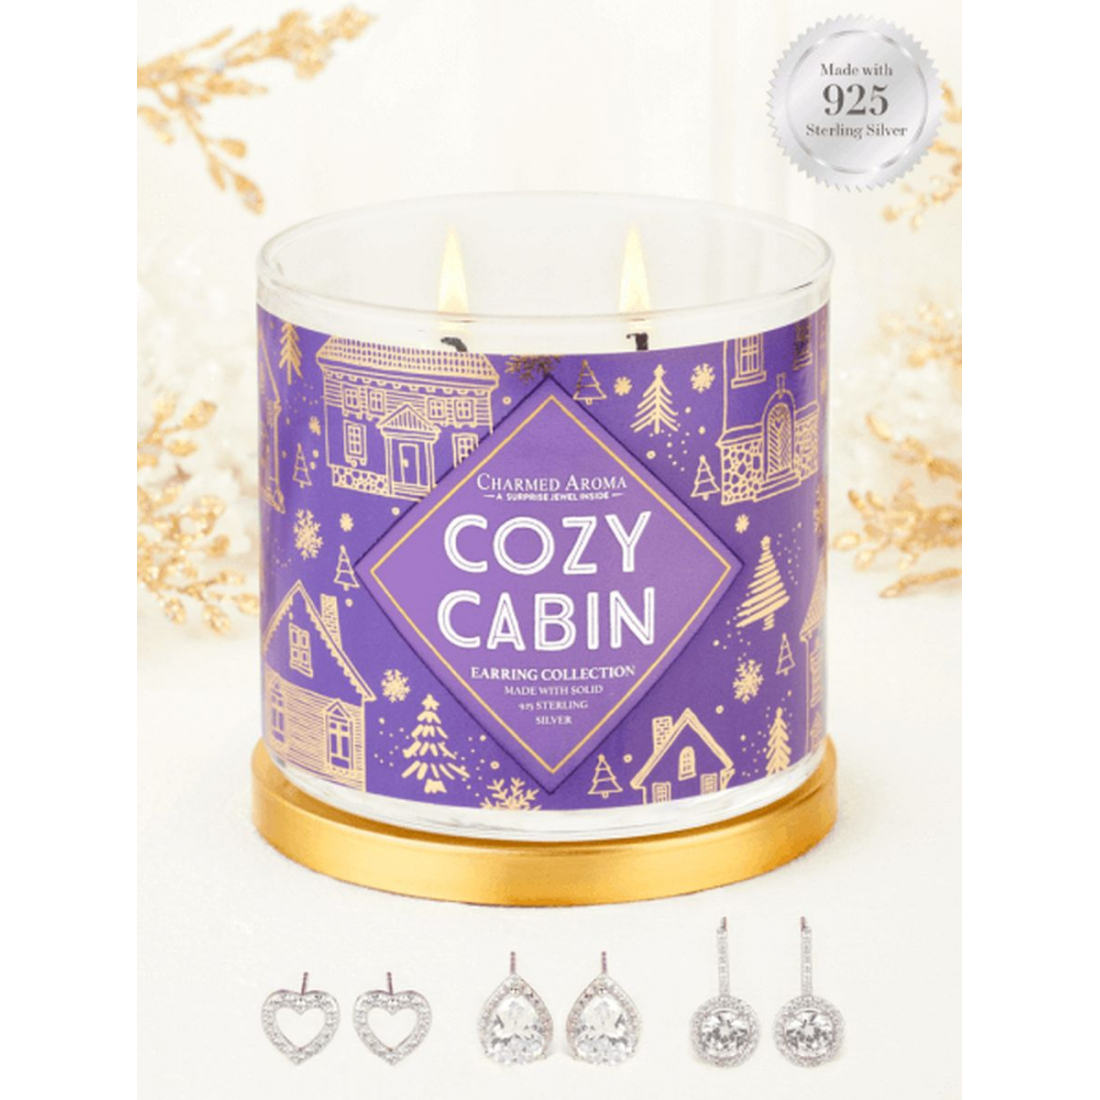 'Cozy Cabin' Candle Set - Earring Collection 500 g